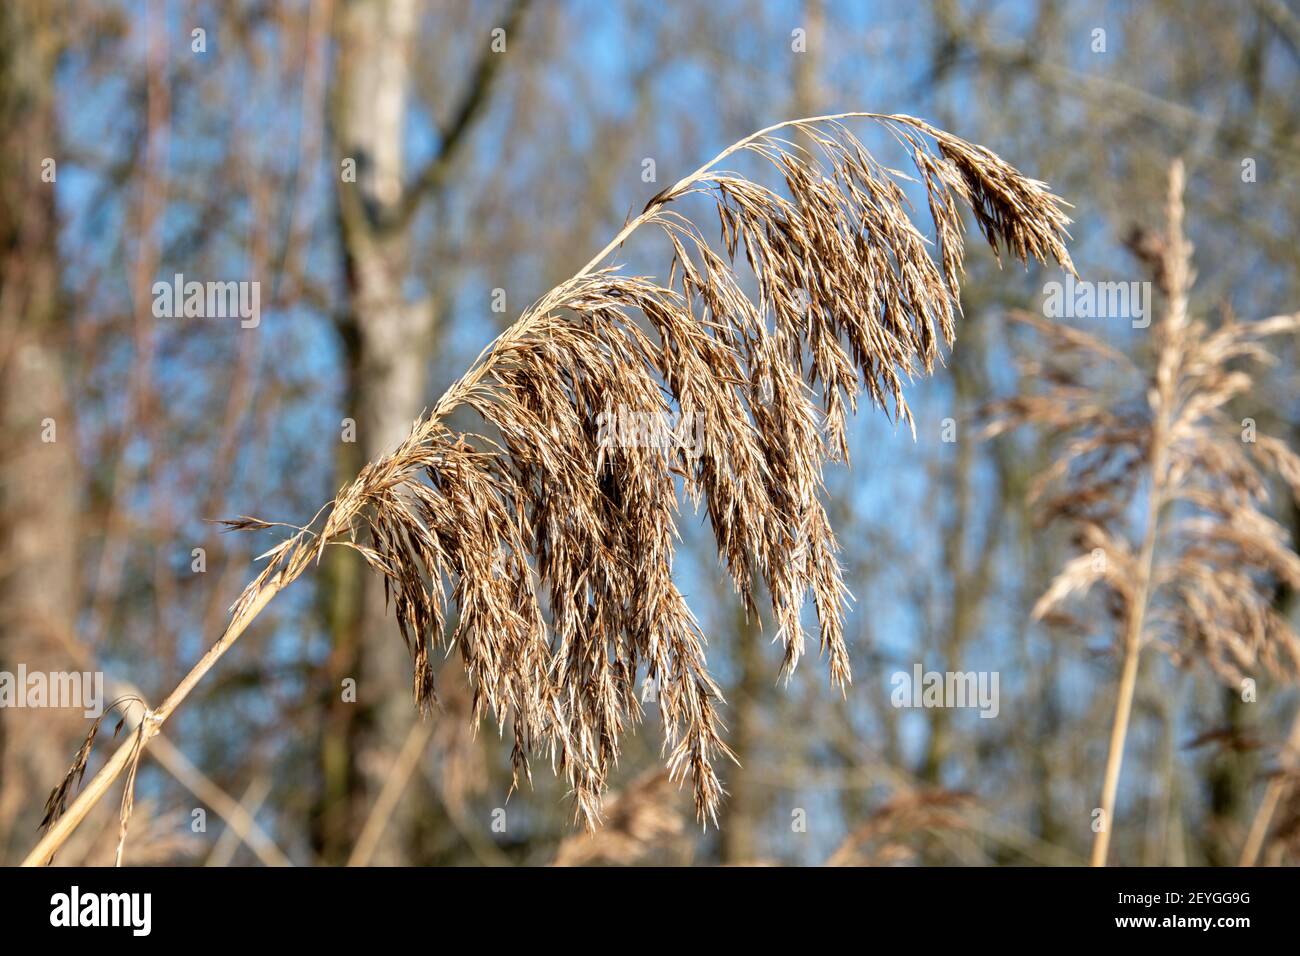 the dried up blossom of a grass at the edge of a pond in winter. Focus on forground Stock Photo